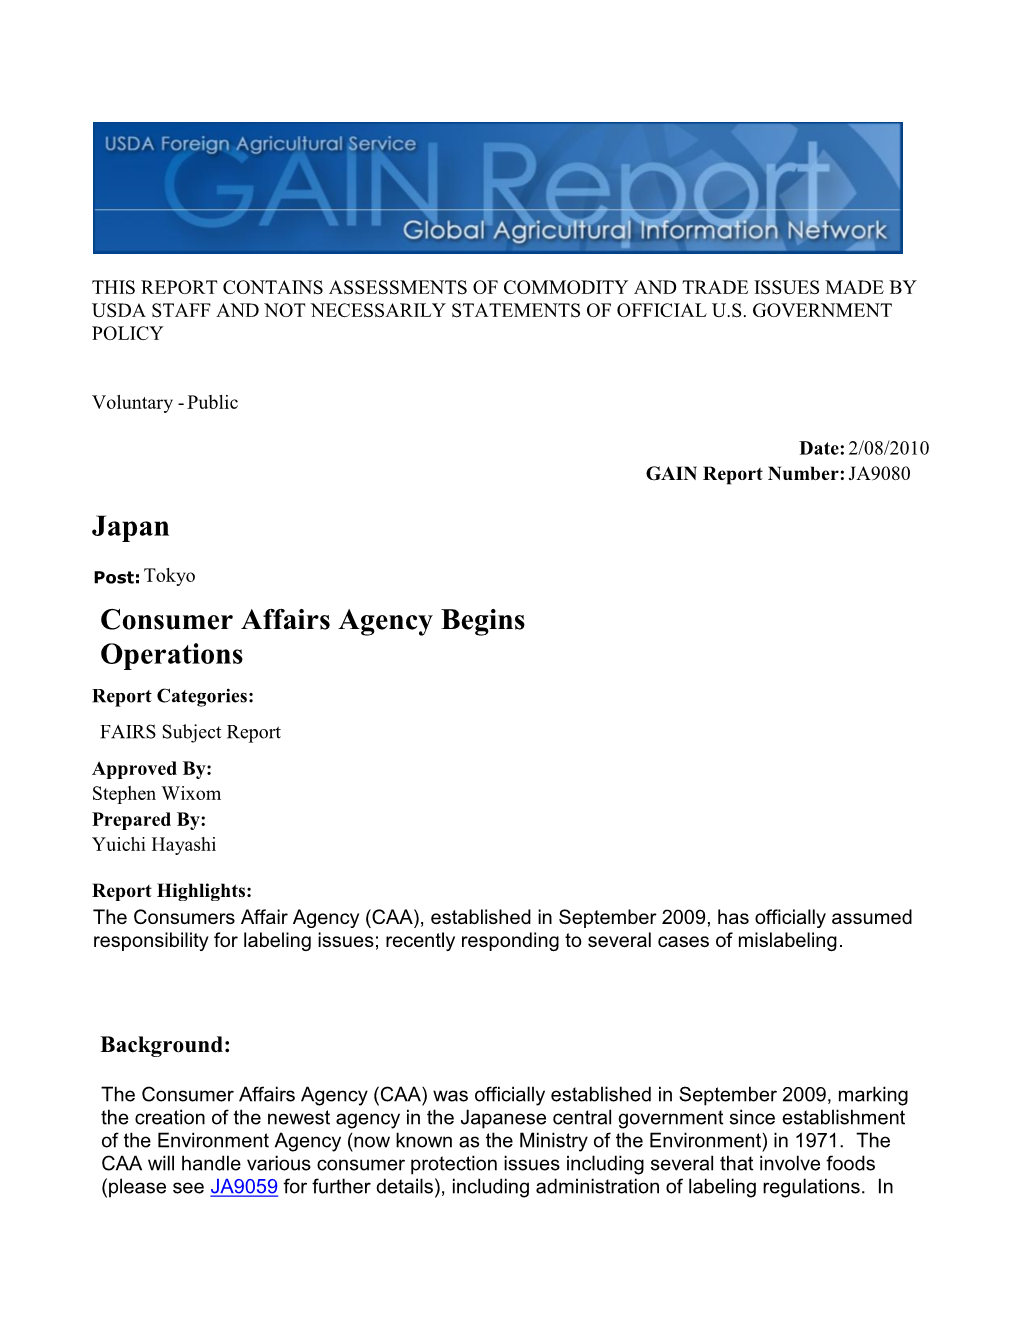 Japan Consumer Affairs Agency Begins Operations